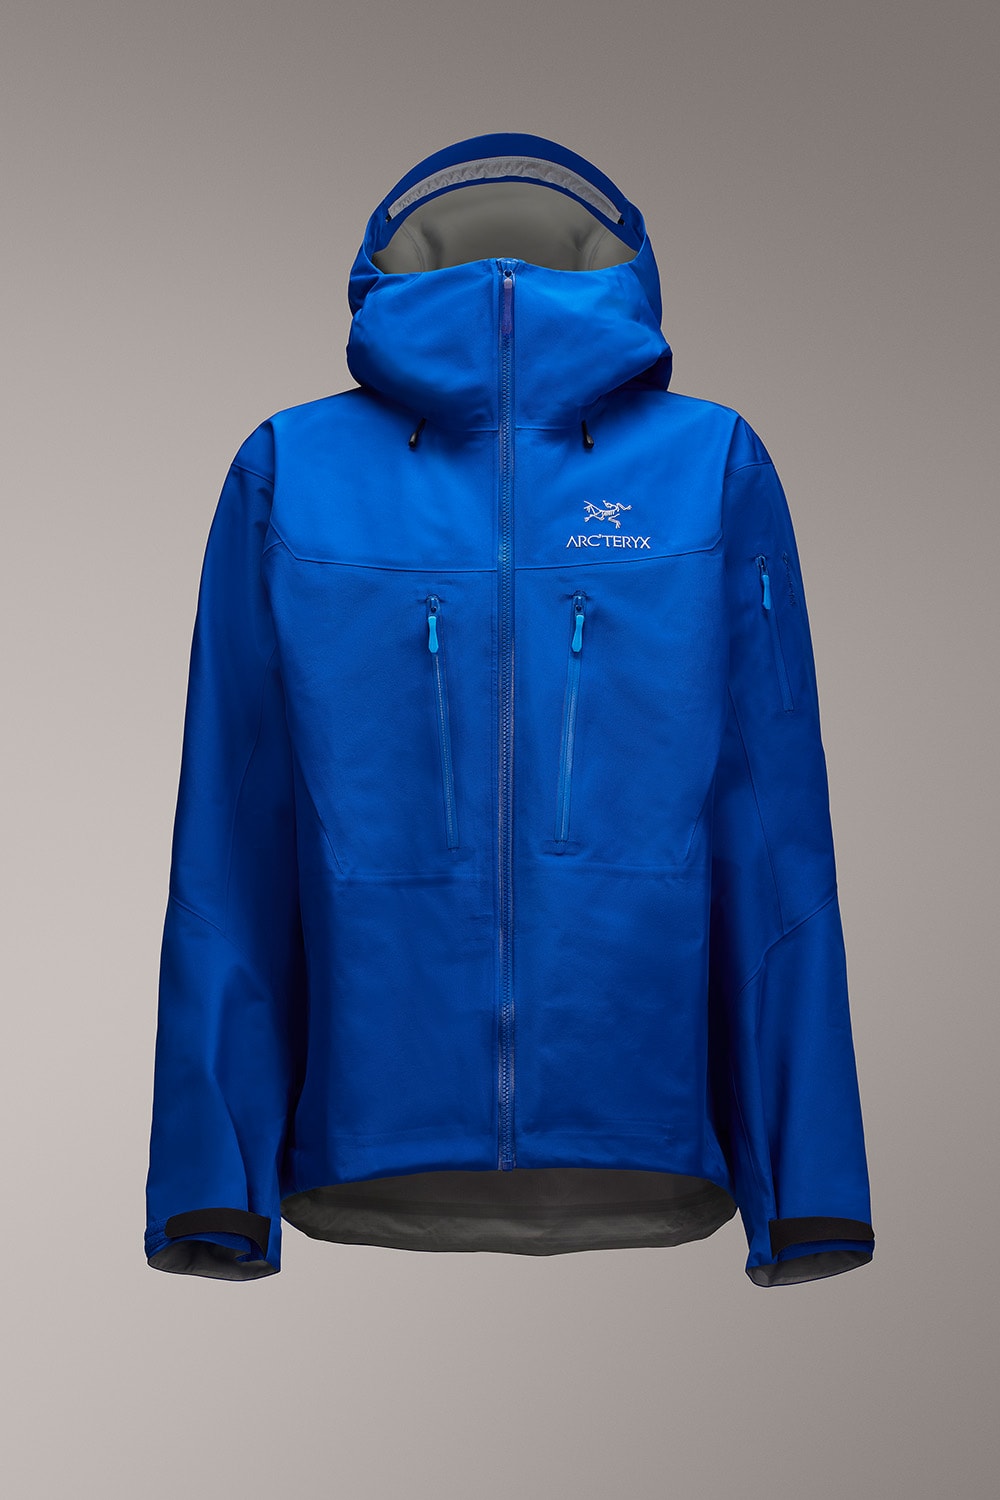 Arc’teryx Updates its Iconic Alpha SV Jacket Gore-Tex Pro Waterproof Fashion North Face Patagonia